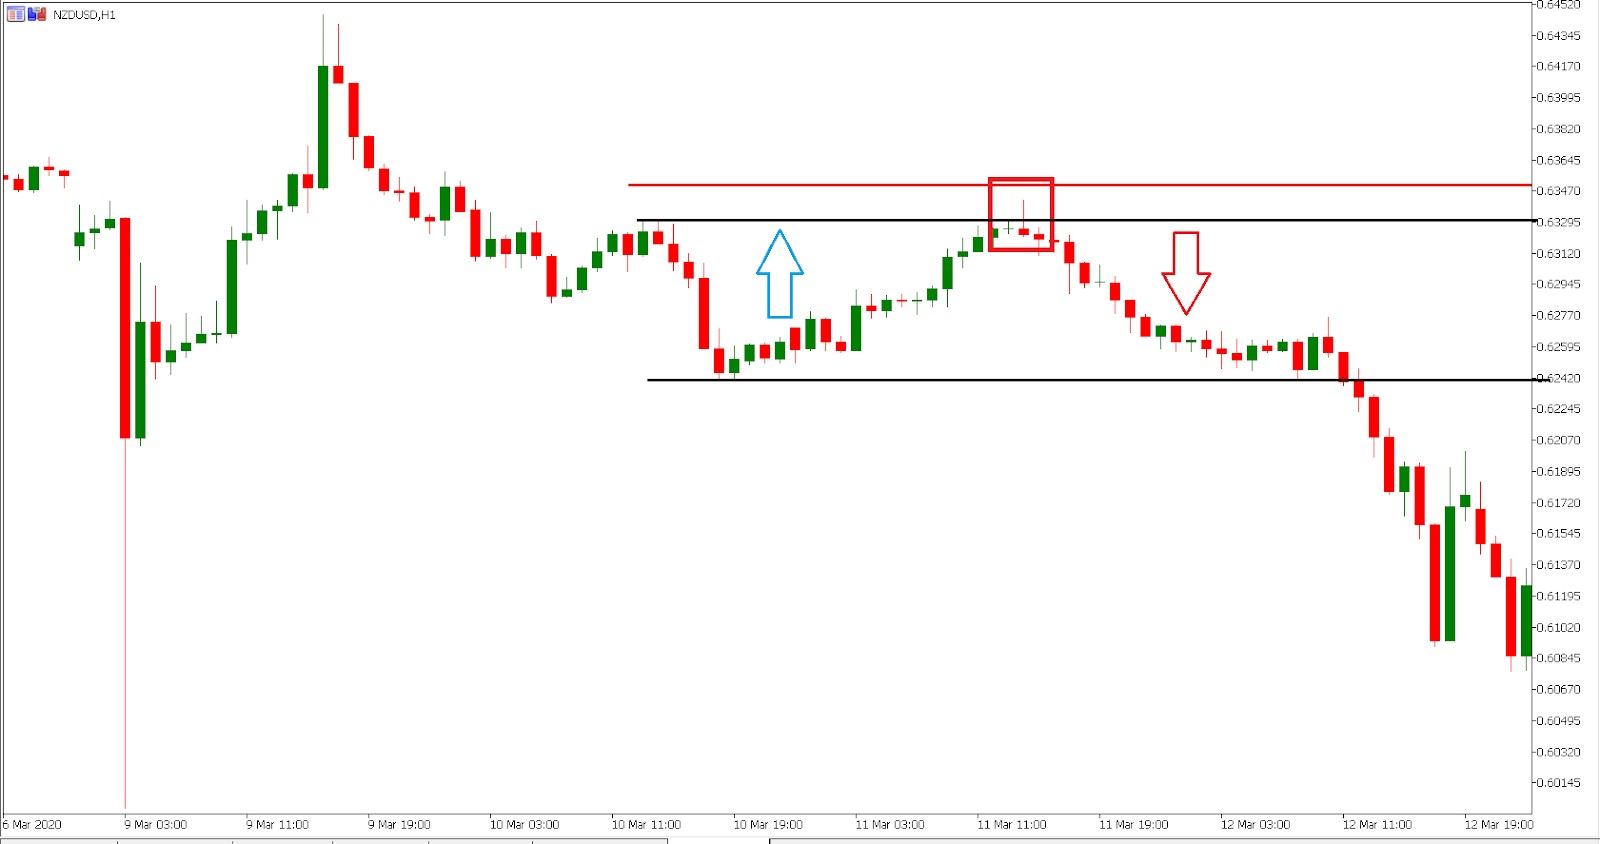 NZD/USD trading the shooting star pattern